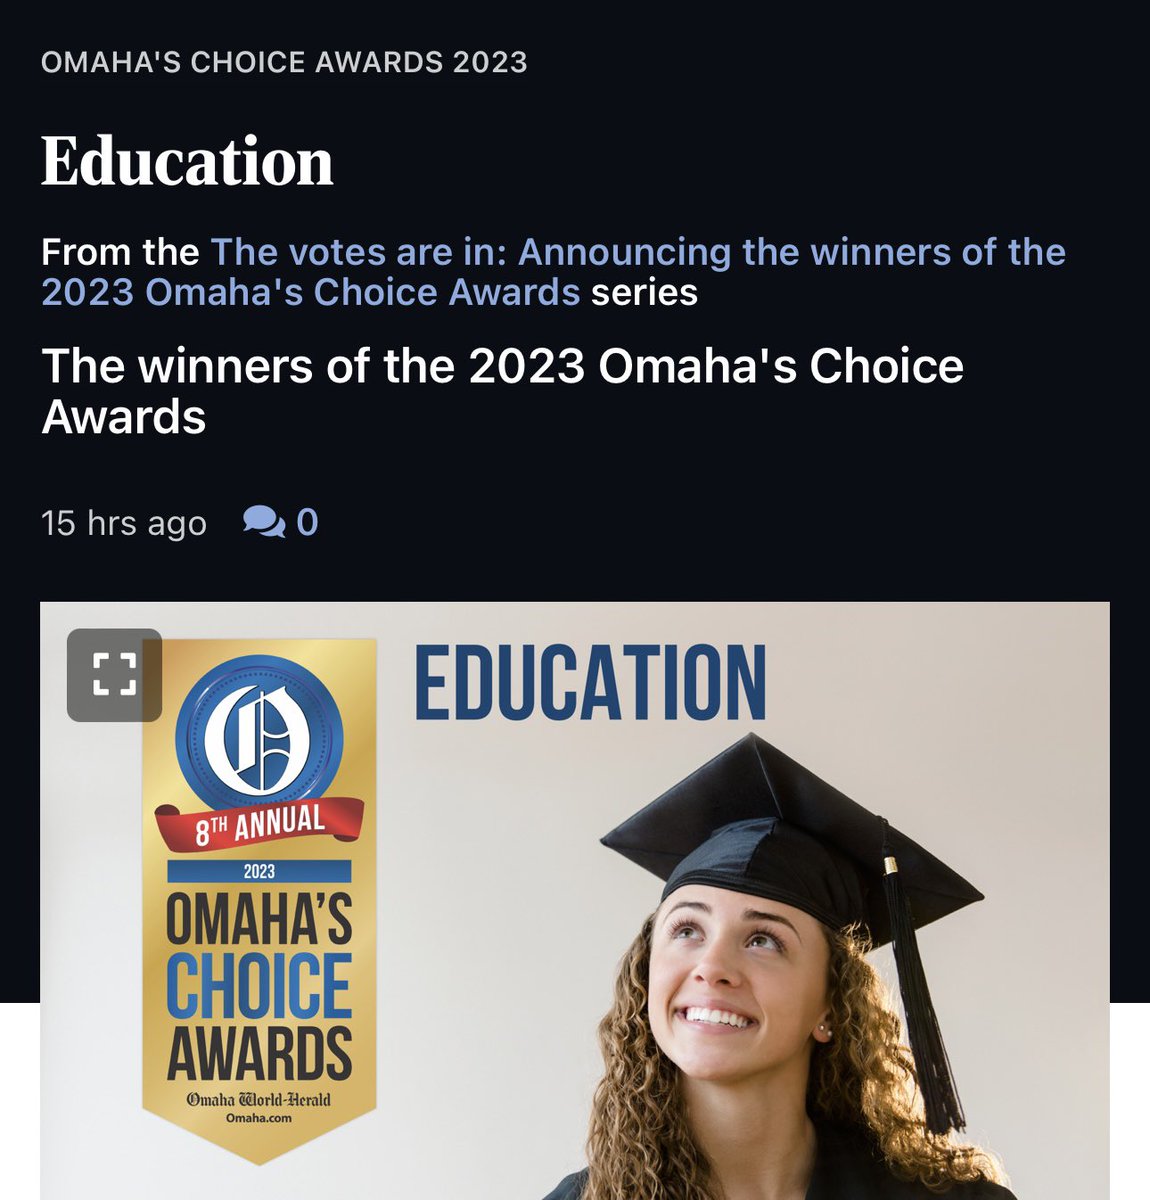 Legit proud and very excited that King Science & Technology Magnet was announced as a winner of the 8th annual 2023 Omaha Choice awards in K-8 Education category!  Go Wildcats!!! 🦁🧡 #KSTMProud #OPSProud 

omaha.com/oca23-educatio…